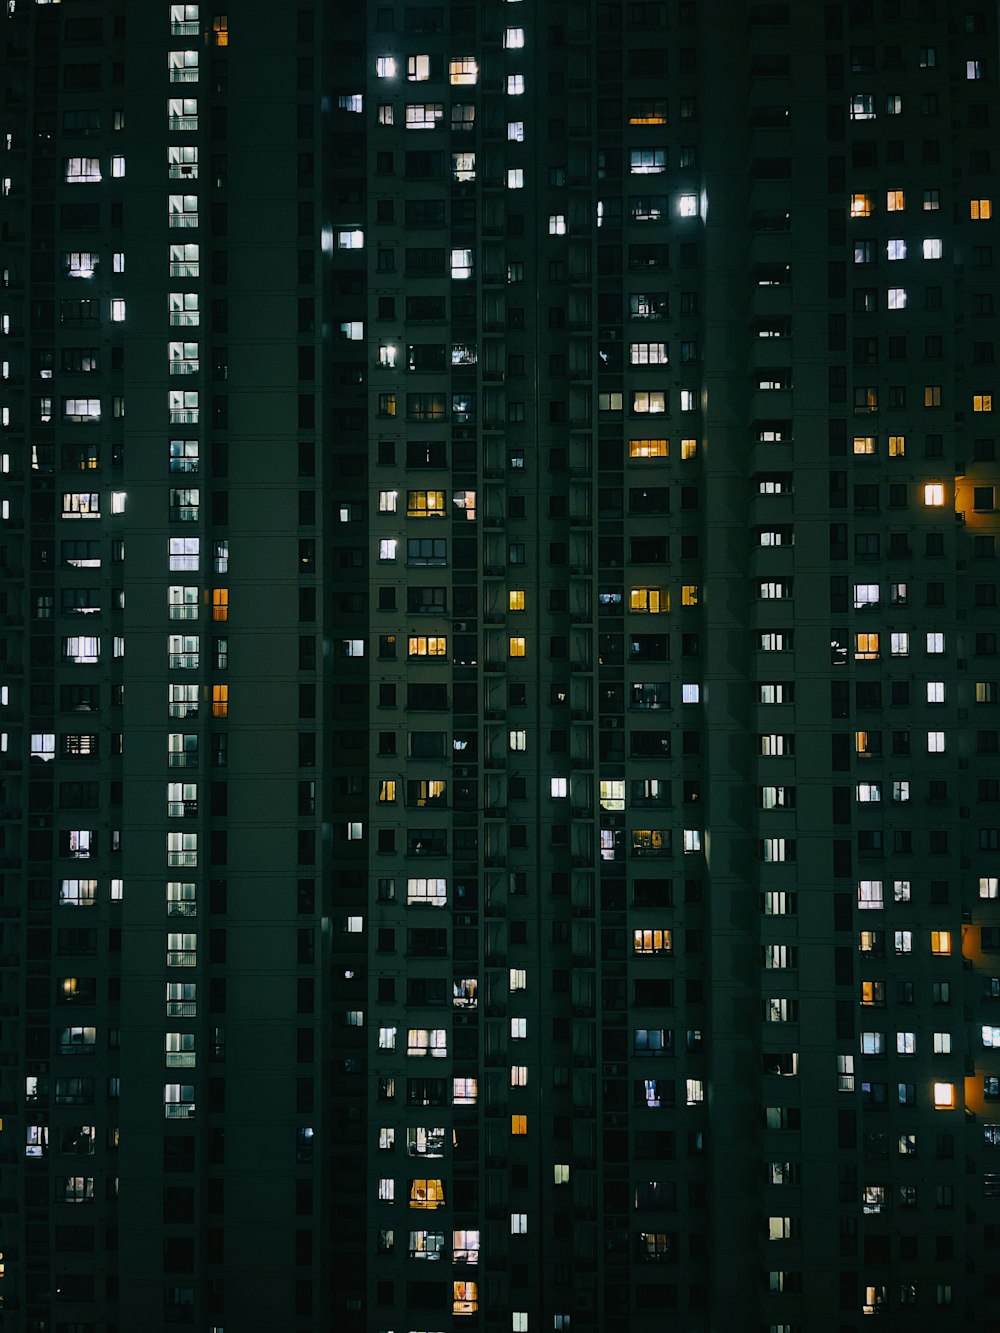 a very tall building with lots of windows at night